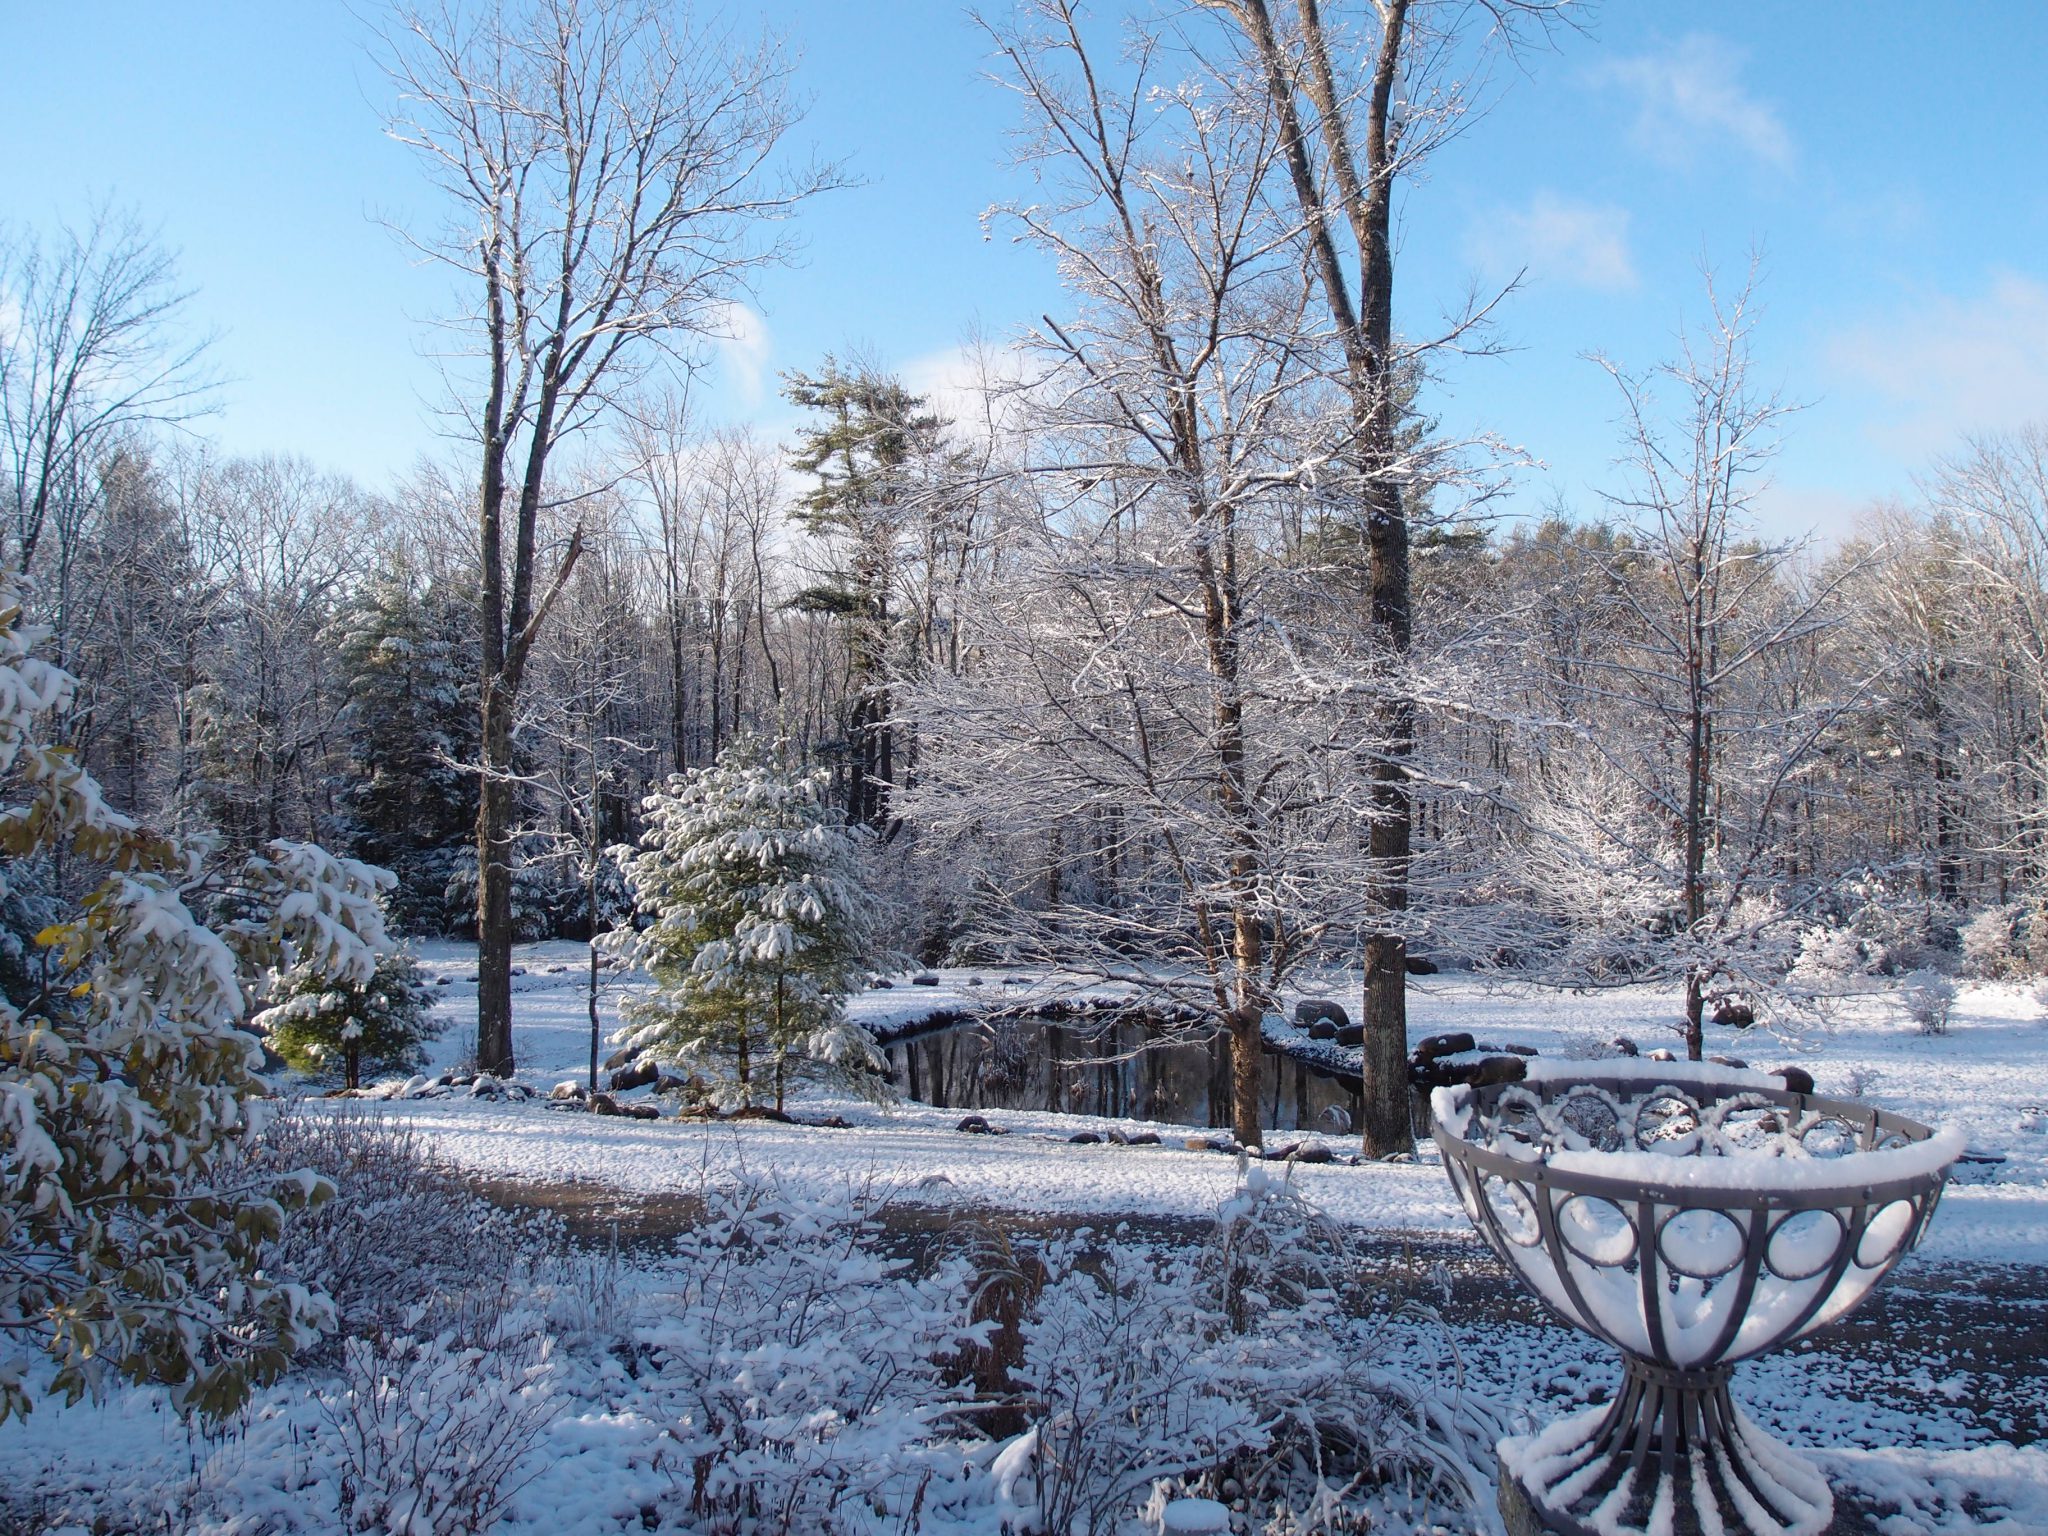 My New Hampshire meadow & pond, on Nov. 14, 2014. This has now given me incentive to write about Warmer Places.